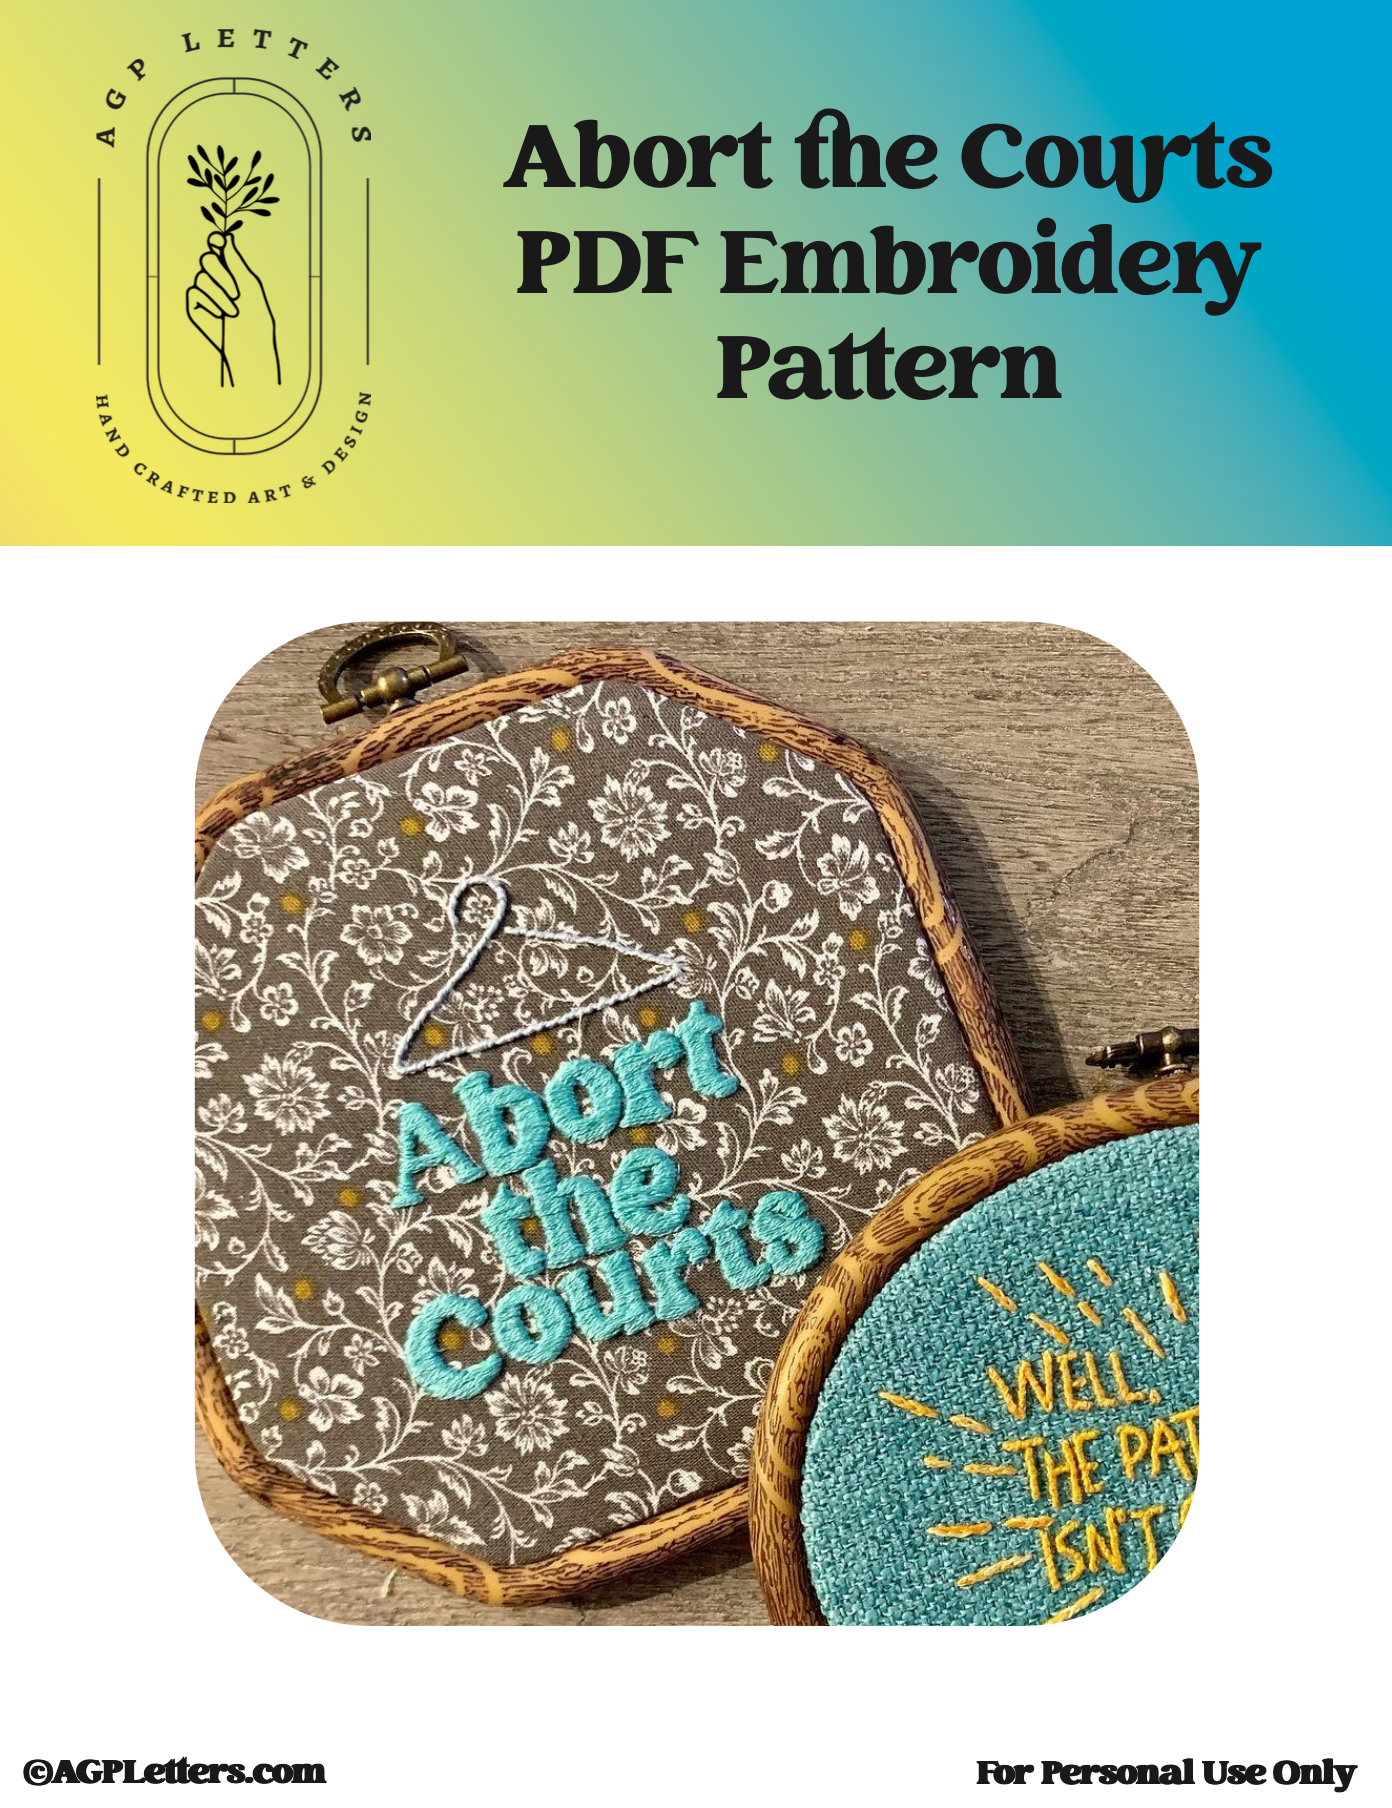 Abort the Courts | Art for a Cause - PDF Embroidery Pattern Download